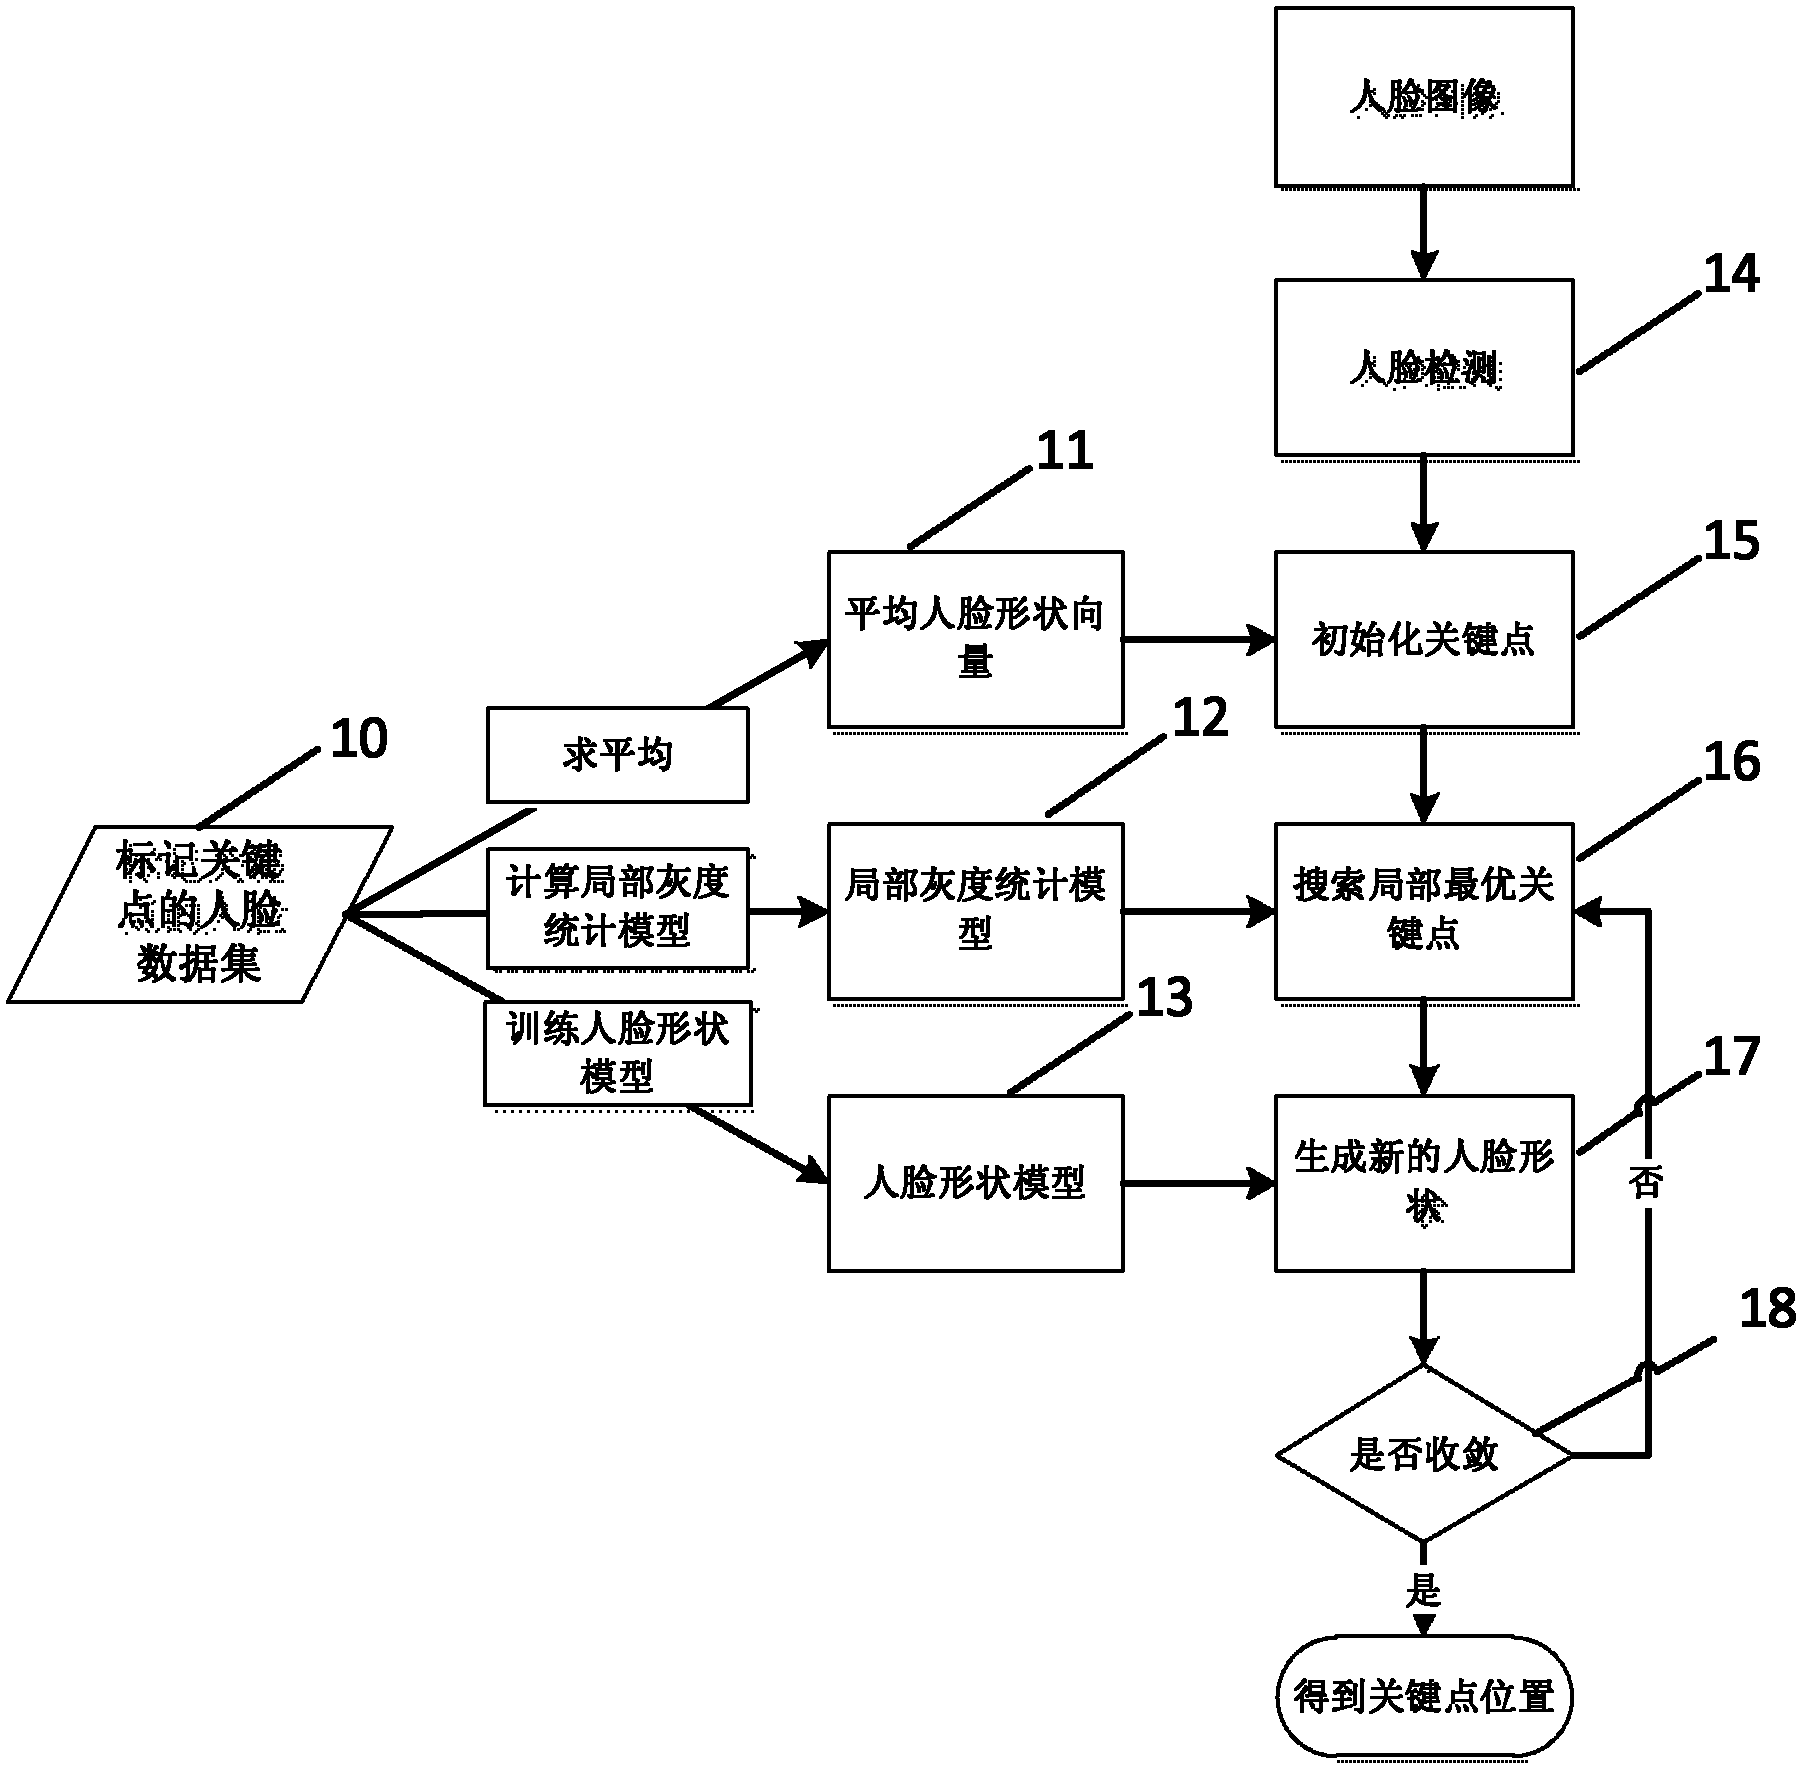 Multi-gesture and cross-age oriented face image authentication method